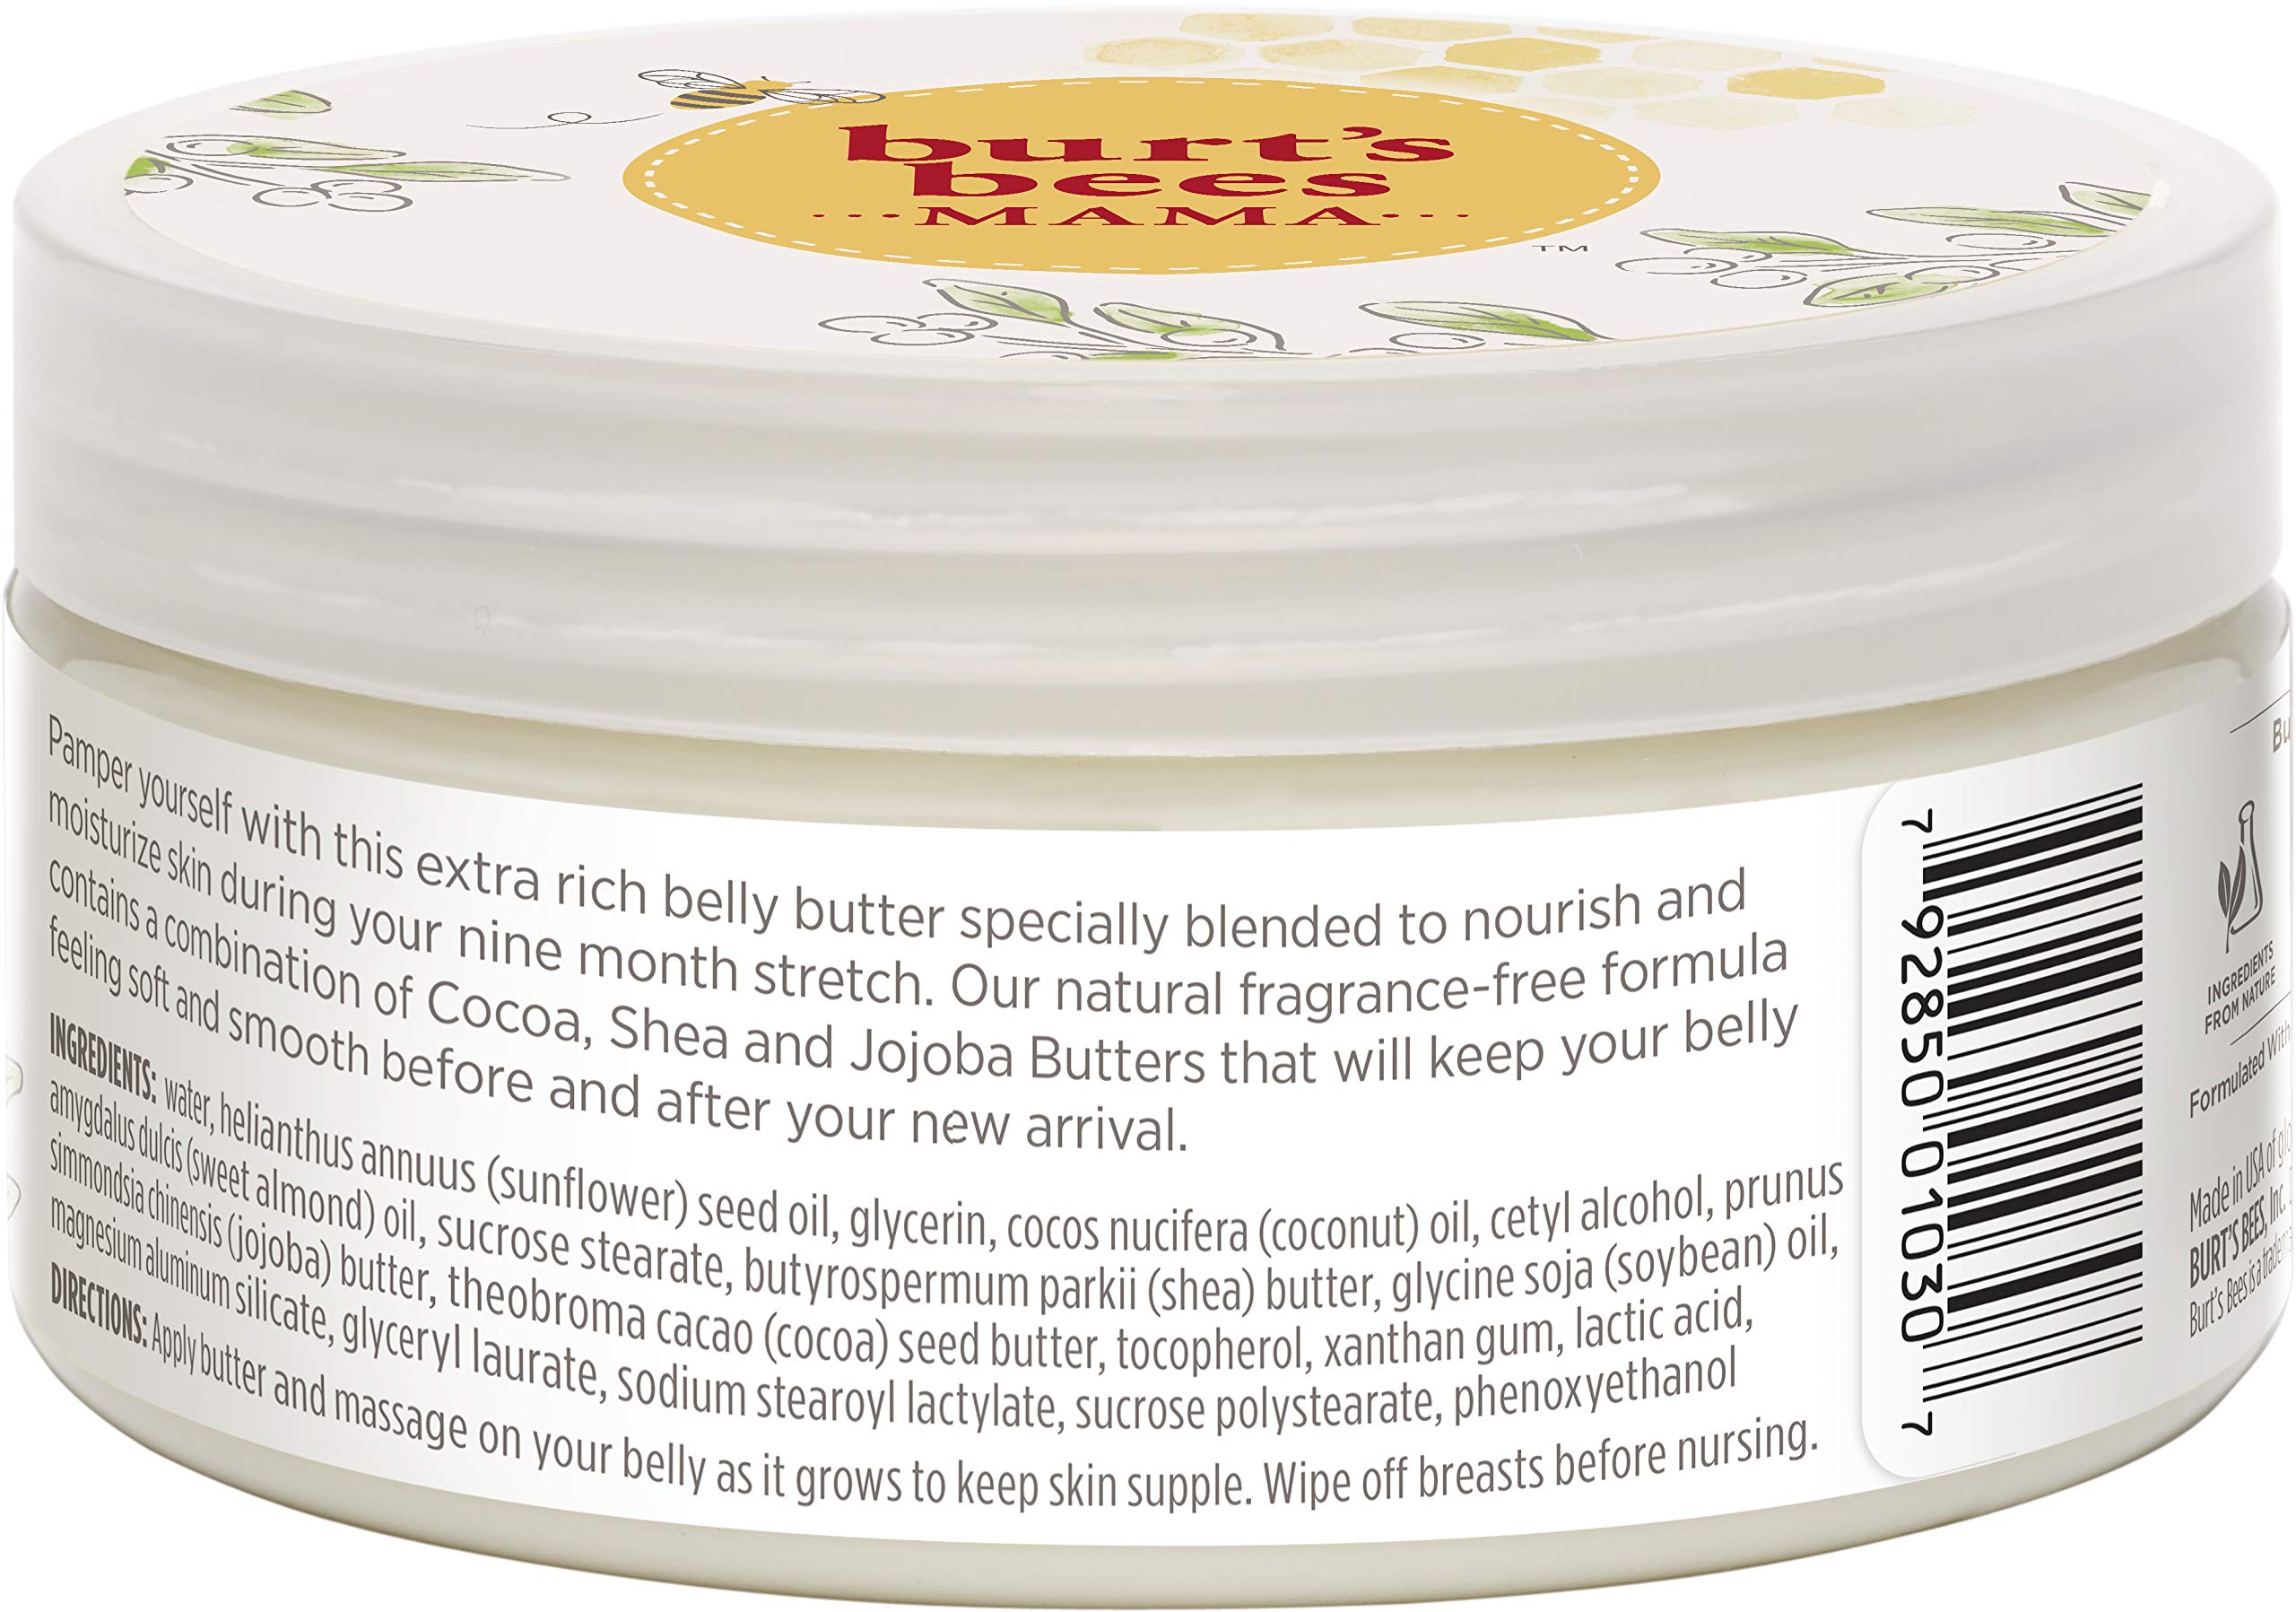 Burt's Bees Mama Belly Butter Skin Care, Pregnancy Lotion & Stretch Mark Cream, with Shea Butter and Vitamin E, 99% Natural, 6.5 Ounce